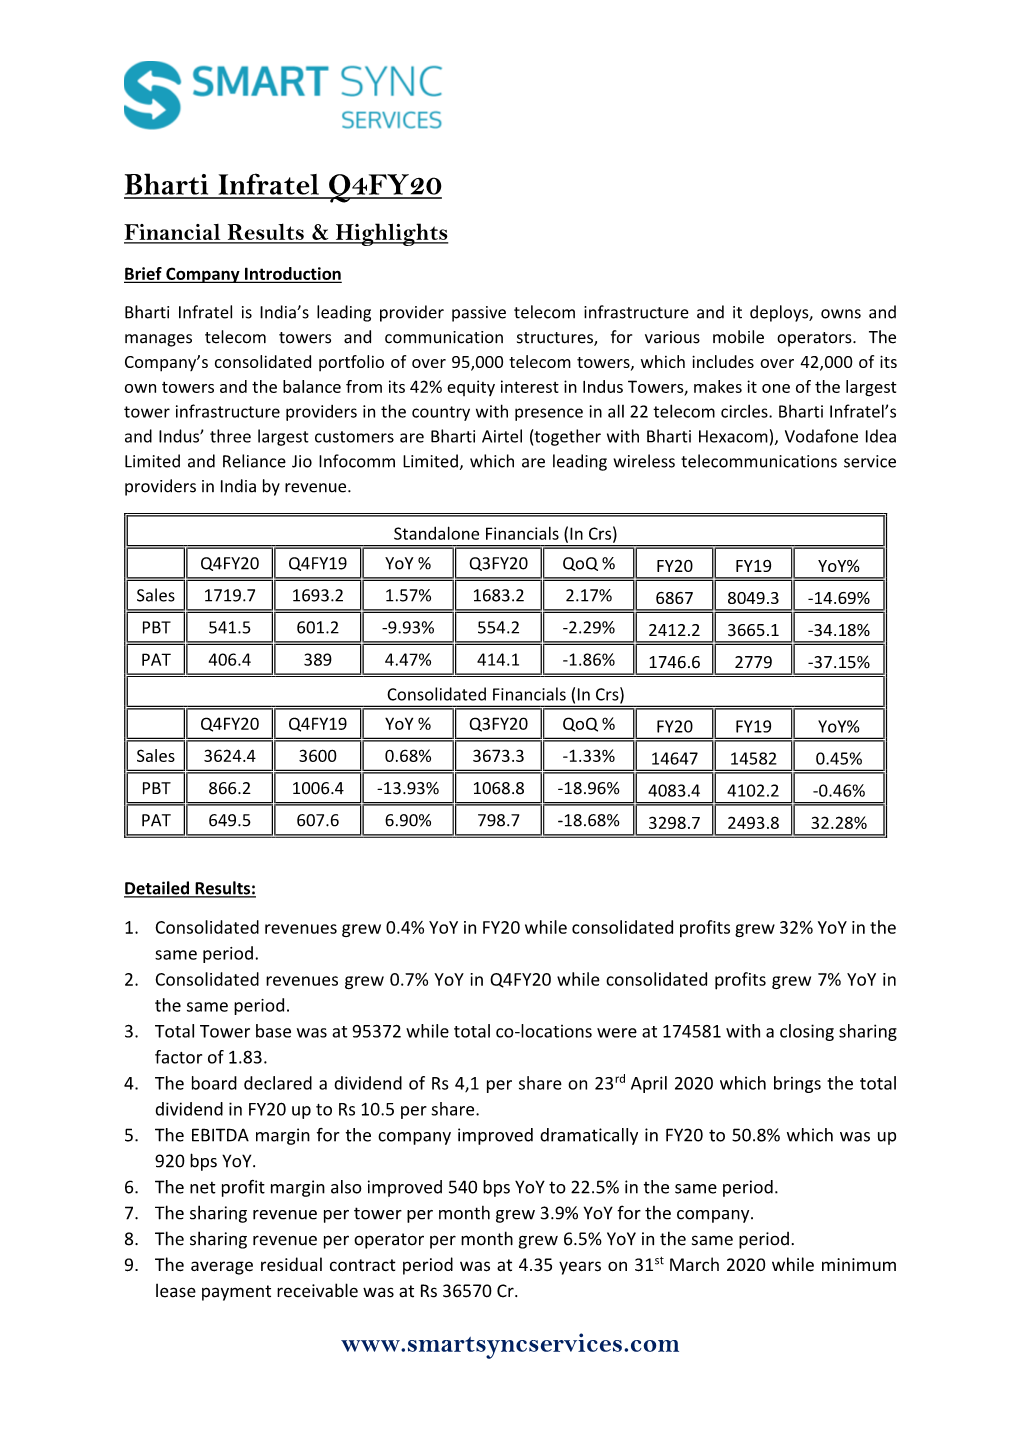 Bharti Infratel Q4FY20 Financial Results & Highlights